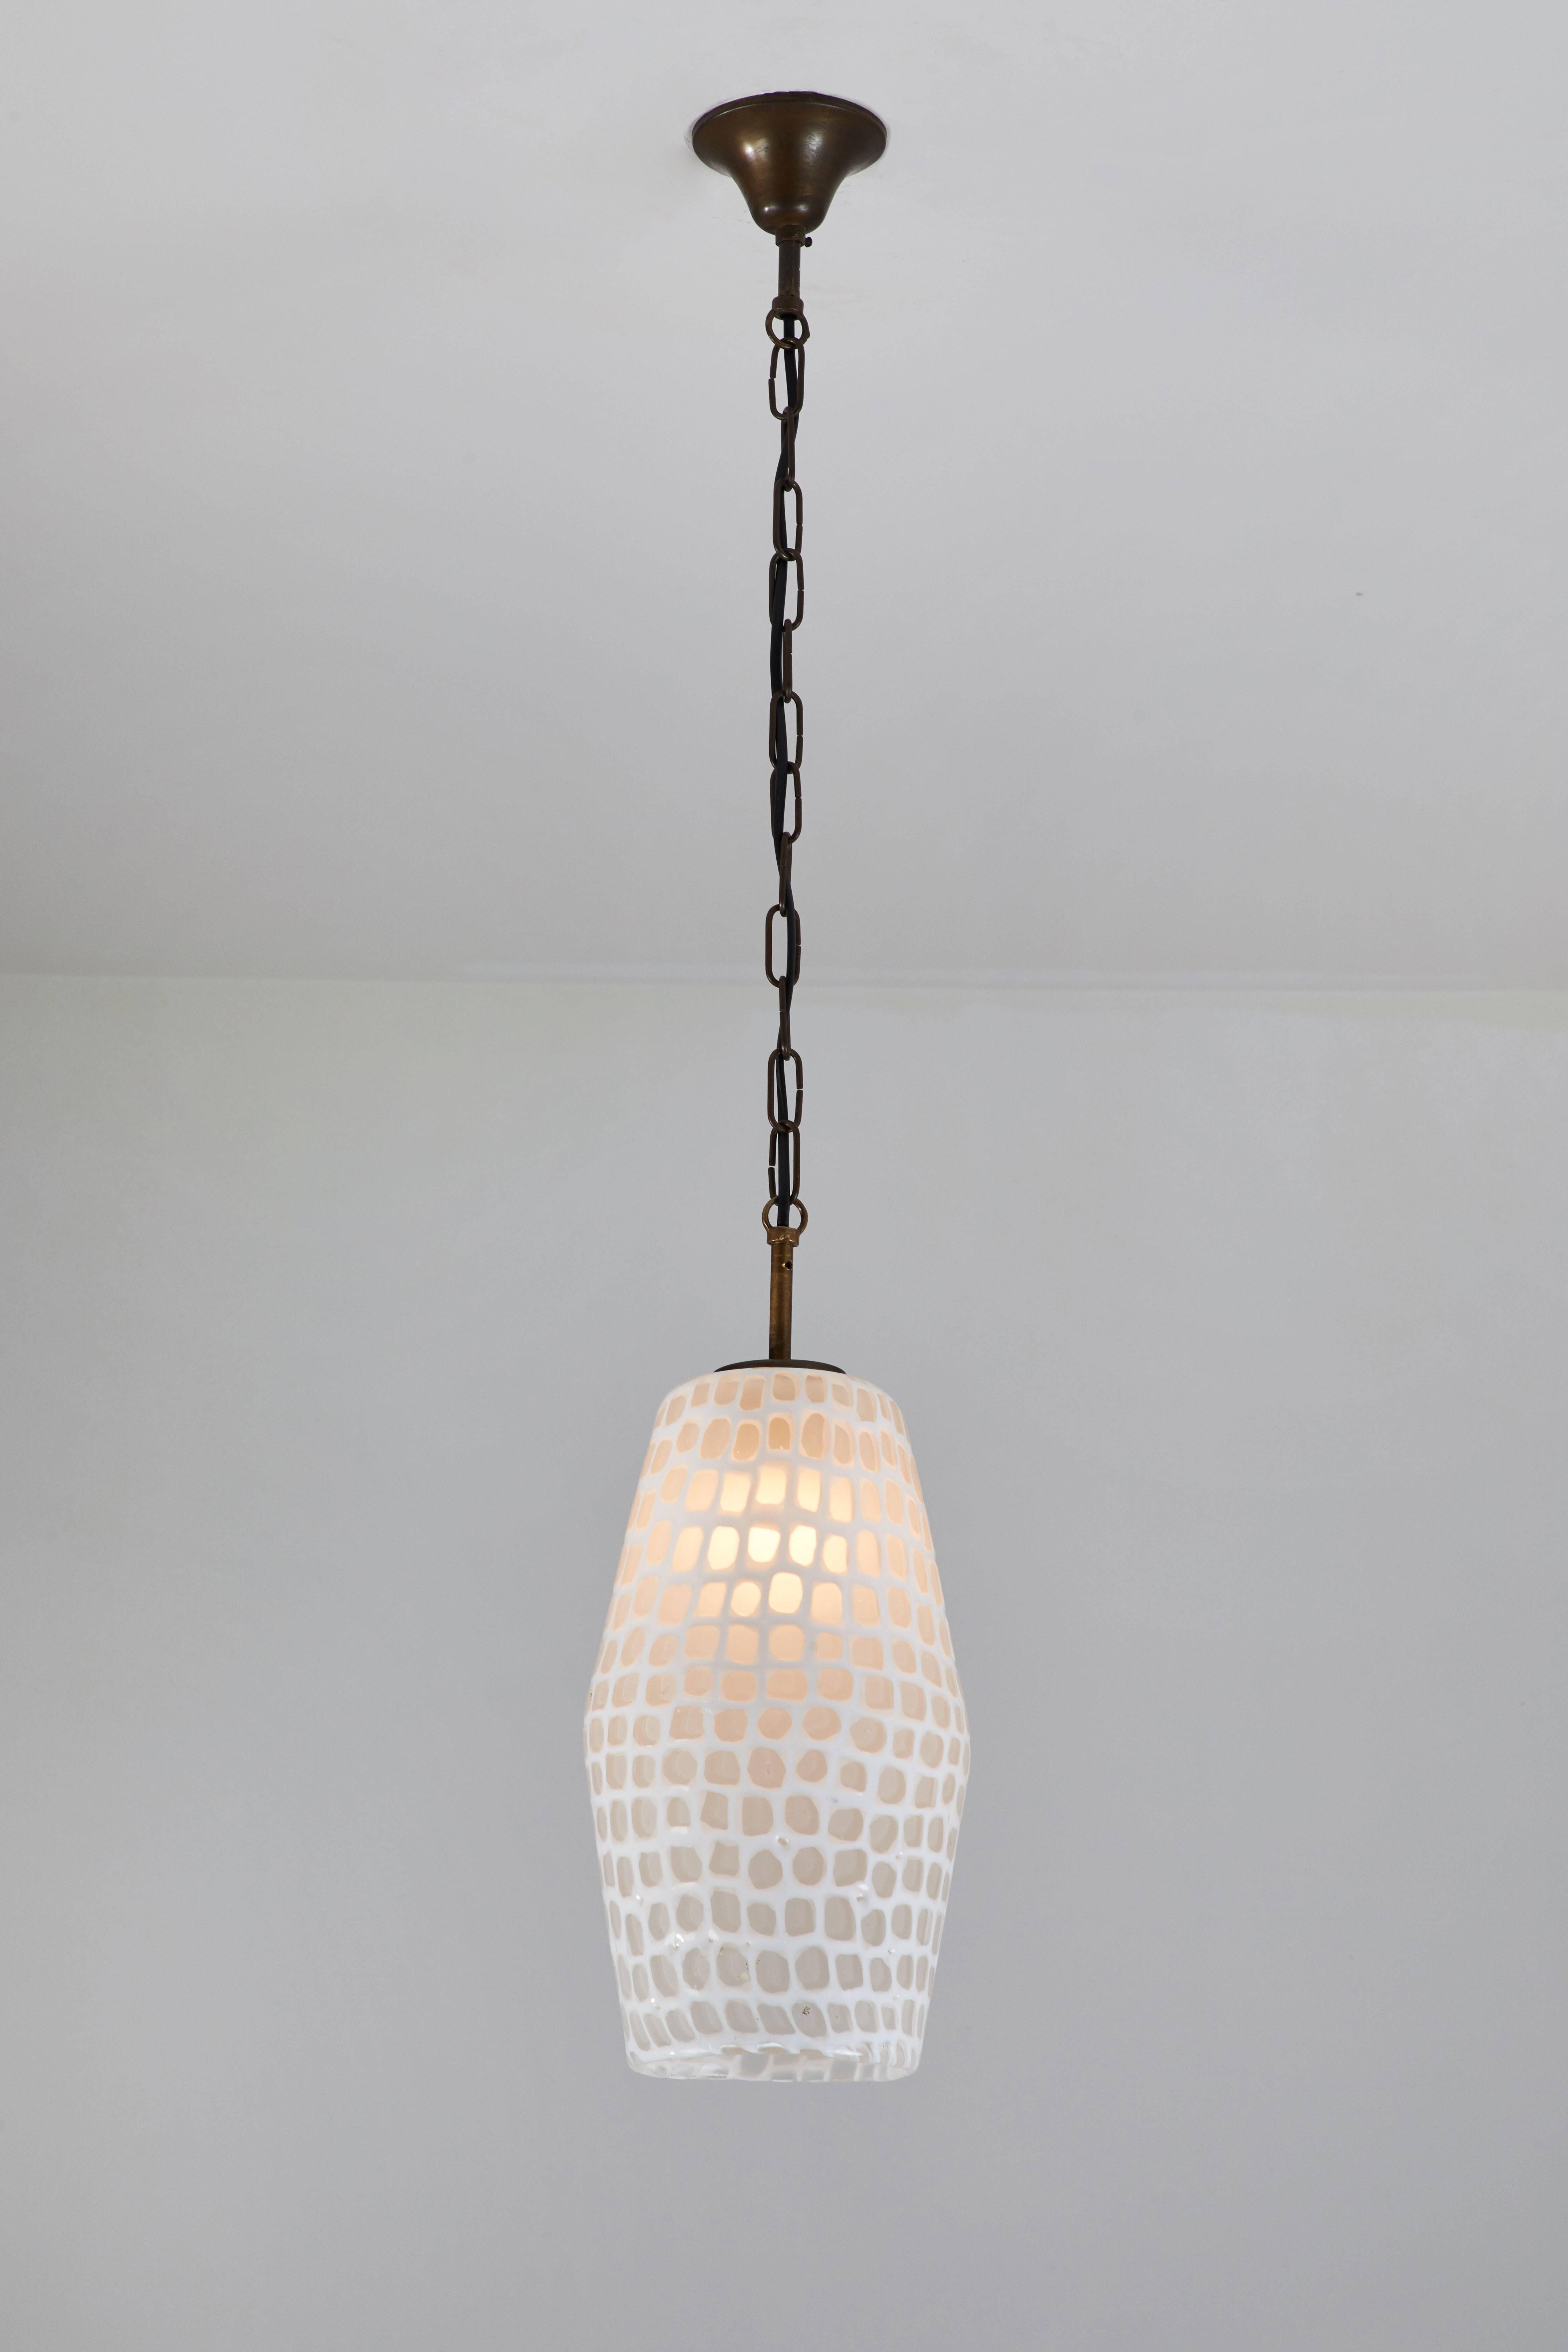 Mid-Century Modern Suspension Light by Tobia Scarpa